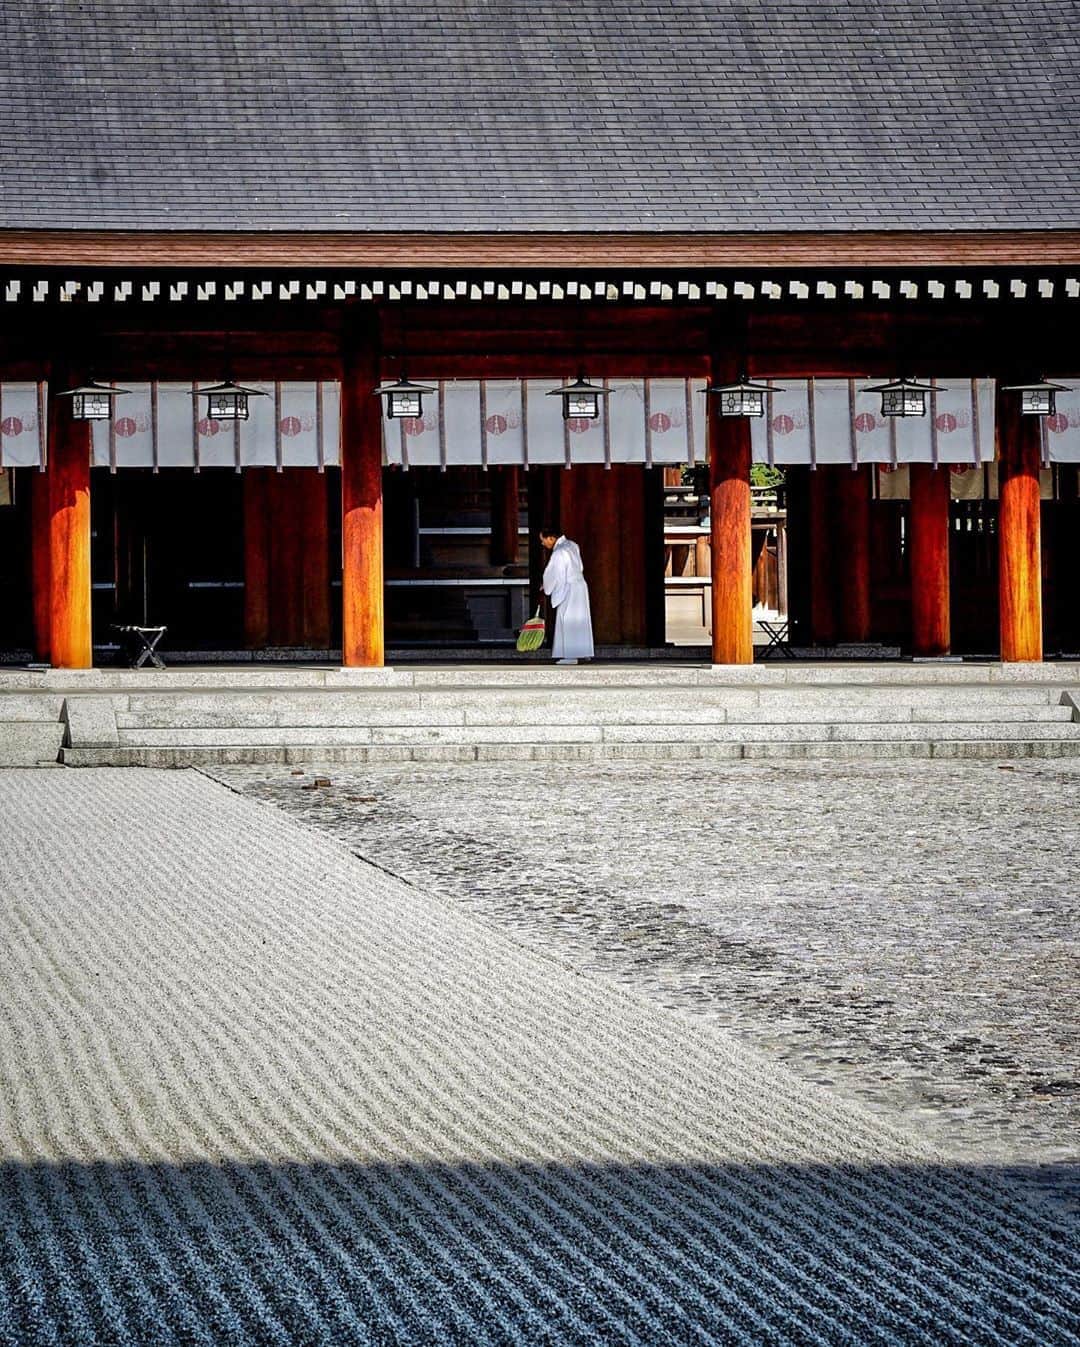 Koichiのインスタグラム：「| Morning routine . #Hellofrom #Nara #BeautifulJapan . #橿原神宮 #橿原 #奈良 . . When the door to the world opens again, please visit beautiful Japan. Japan has a unique culture and beautiful seasonal nature that will always give you fresh surprises and wonderful experiences. See you soon! .」